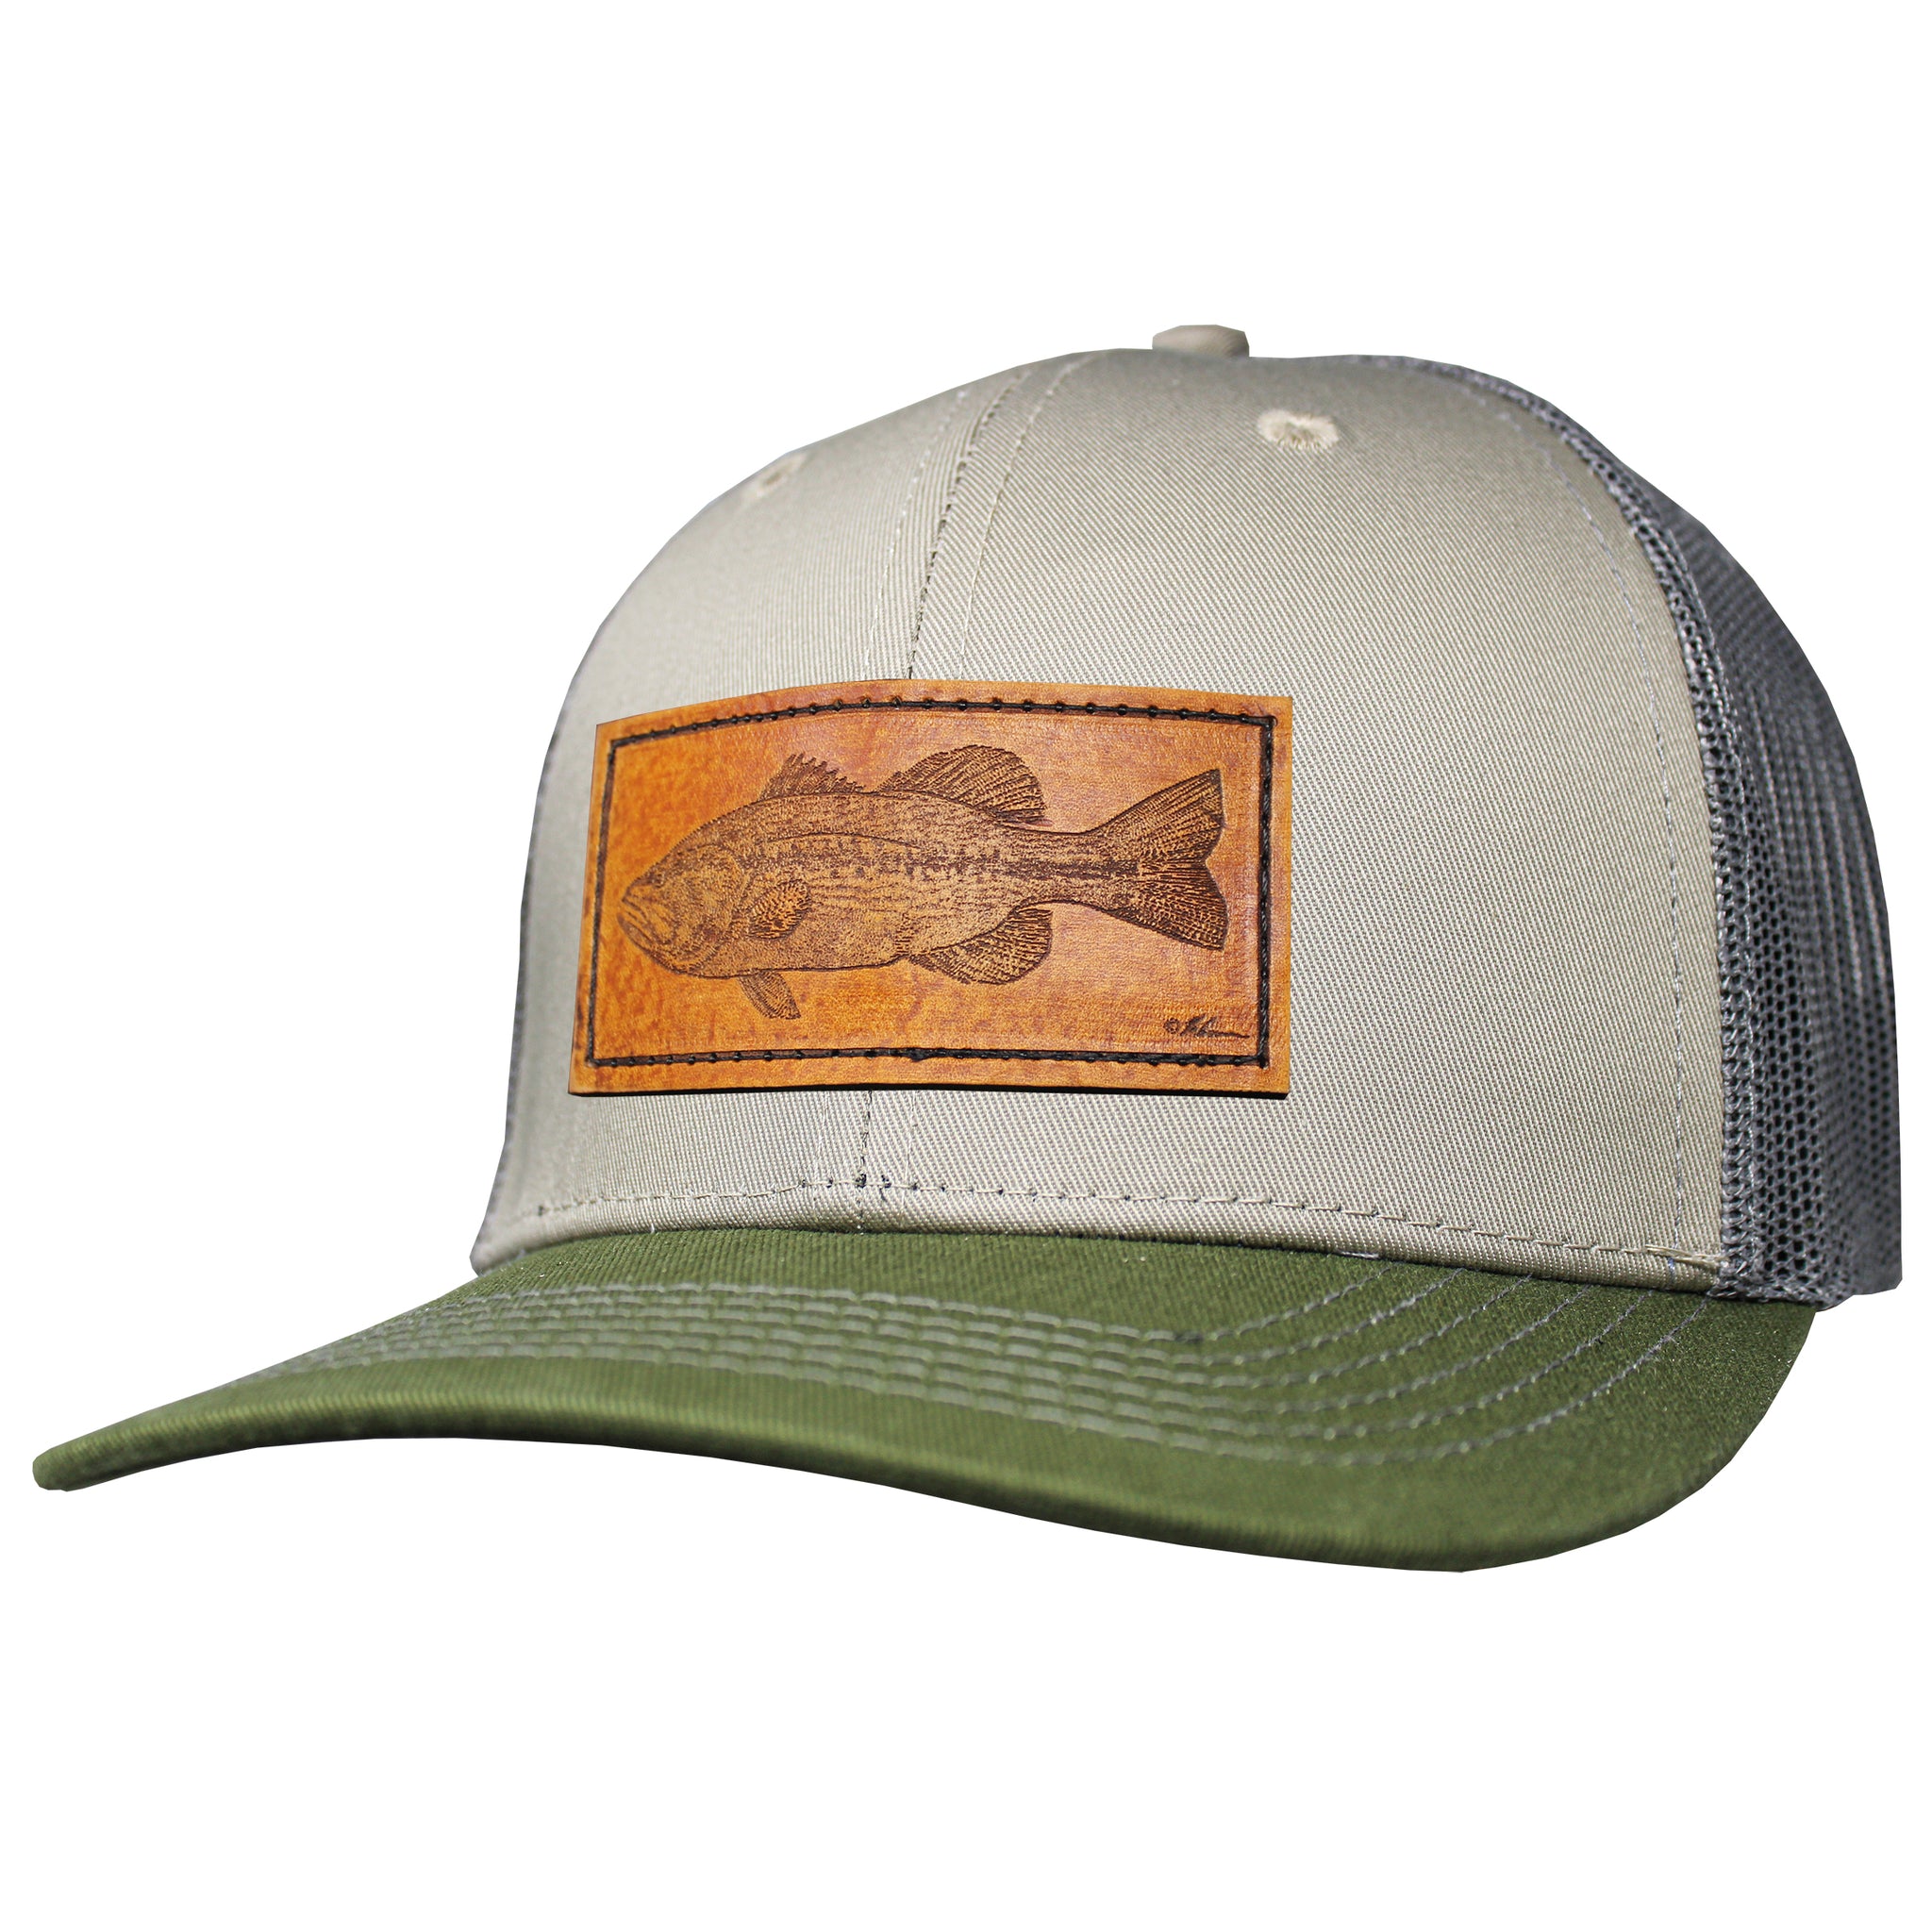 Trucker Performance Cap - Bass Leather Patch